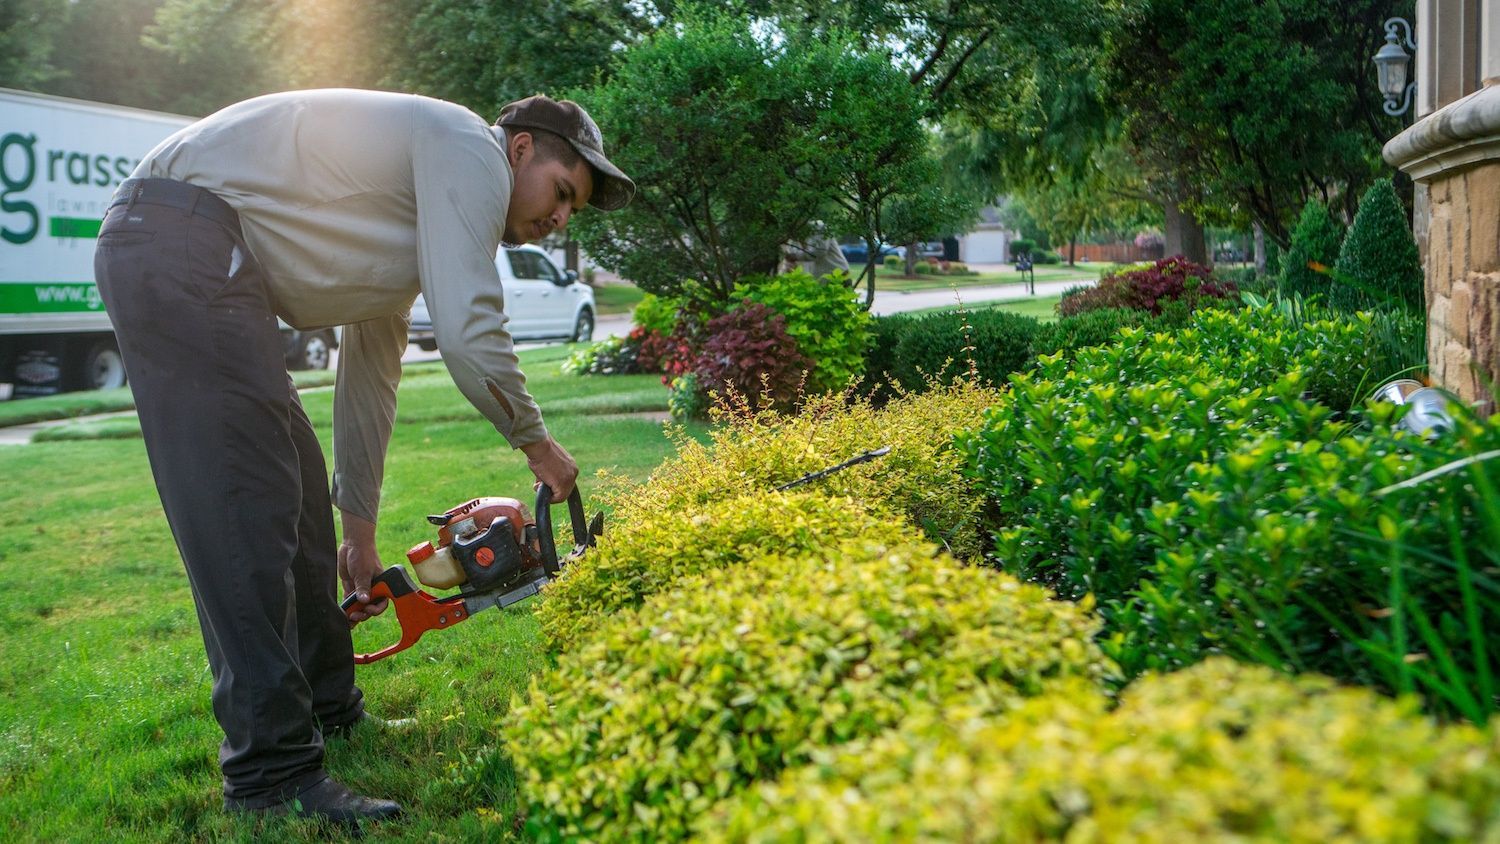 Shrub Trimming Vs Pruning What S The Difference How Will A Landscape Company Near Me Perform These Services